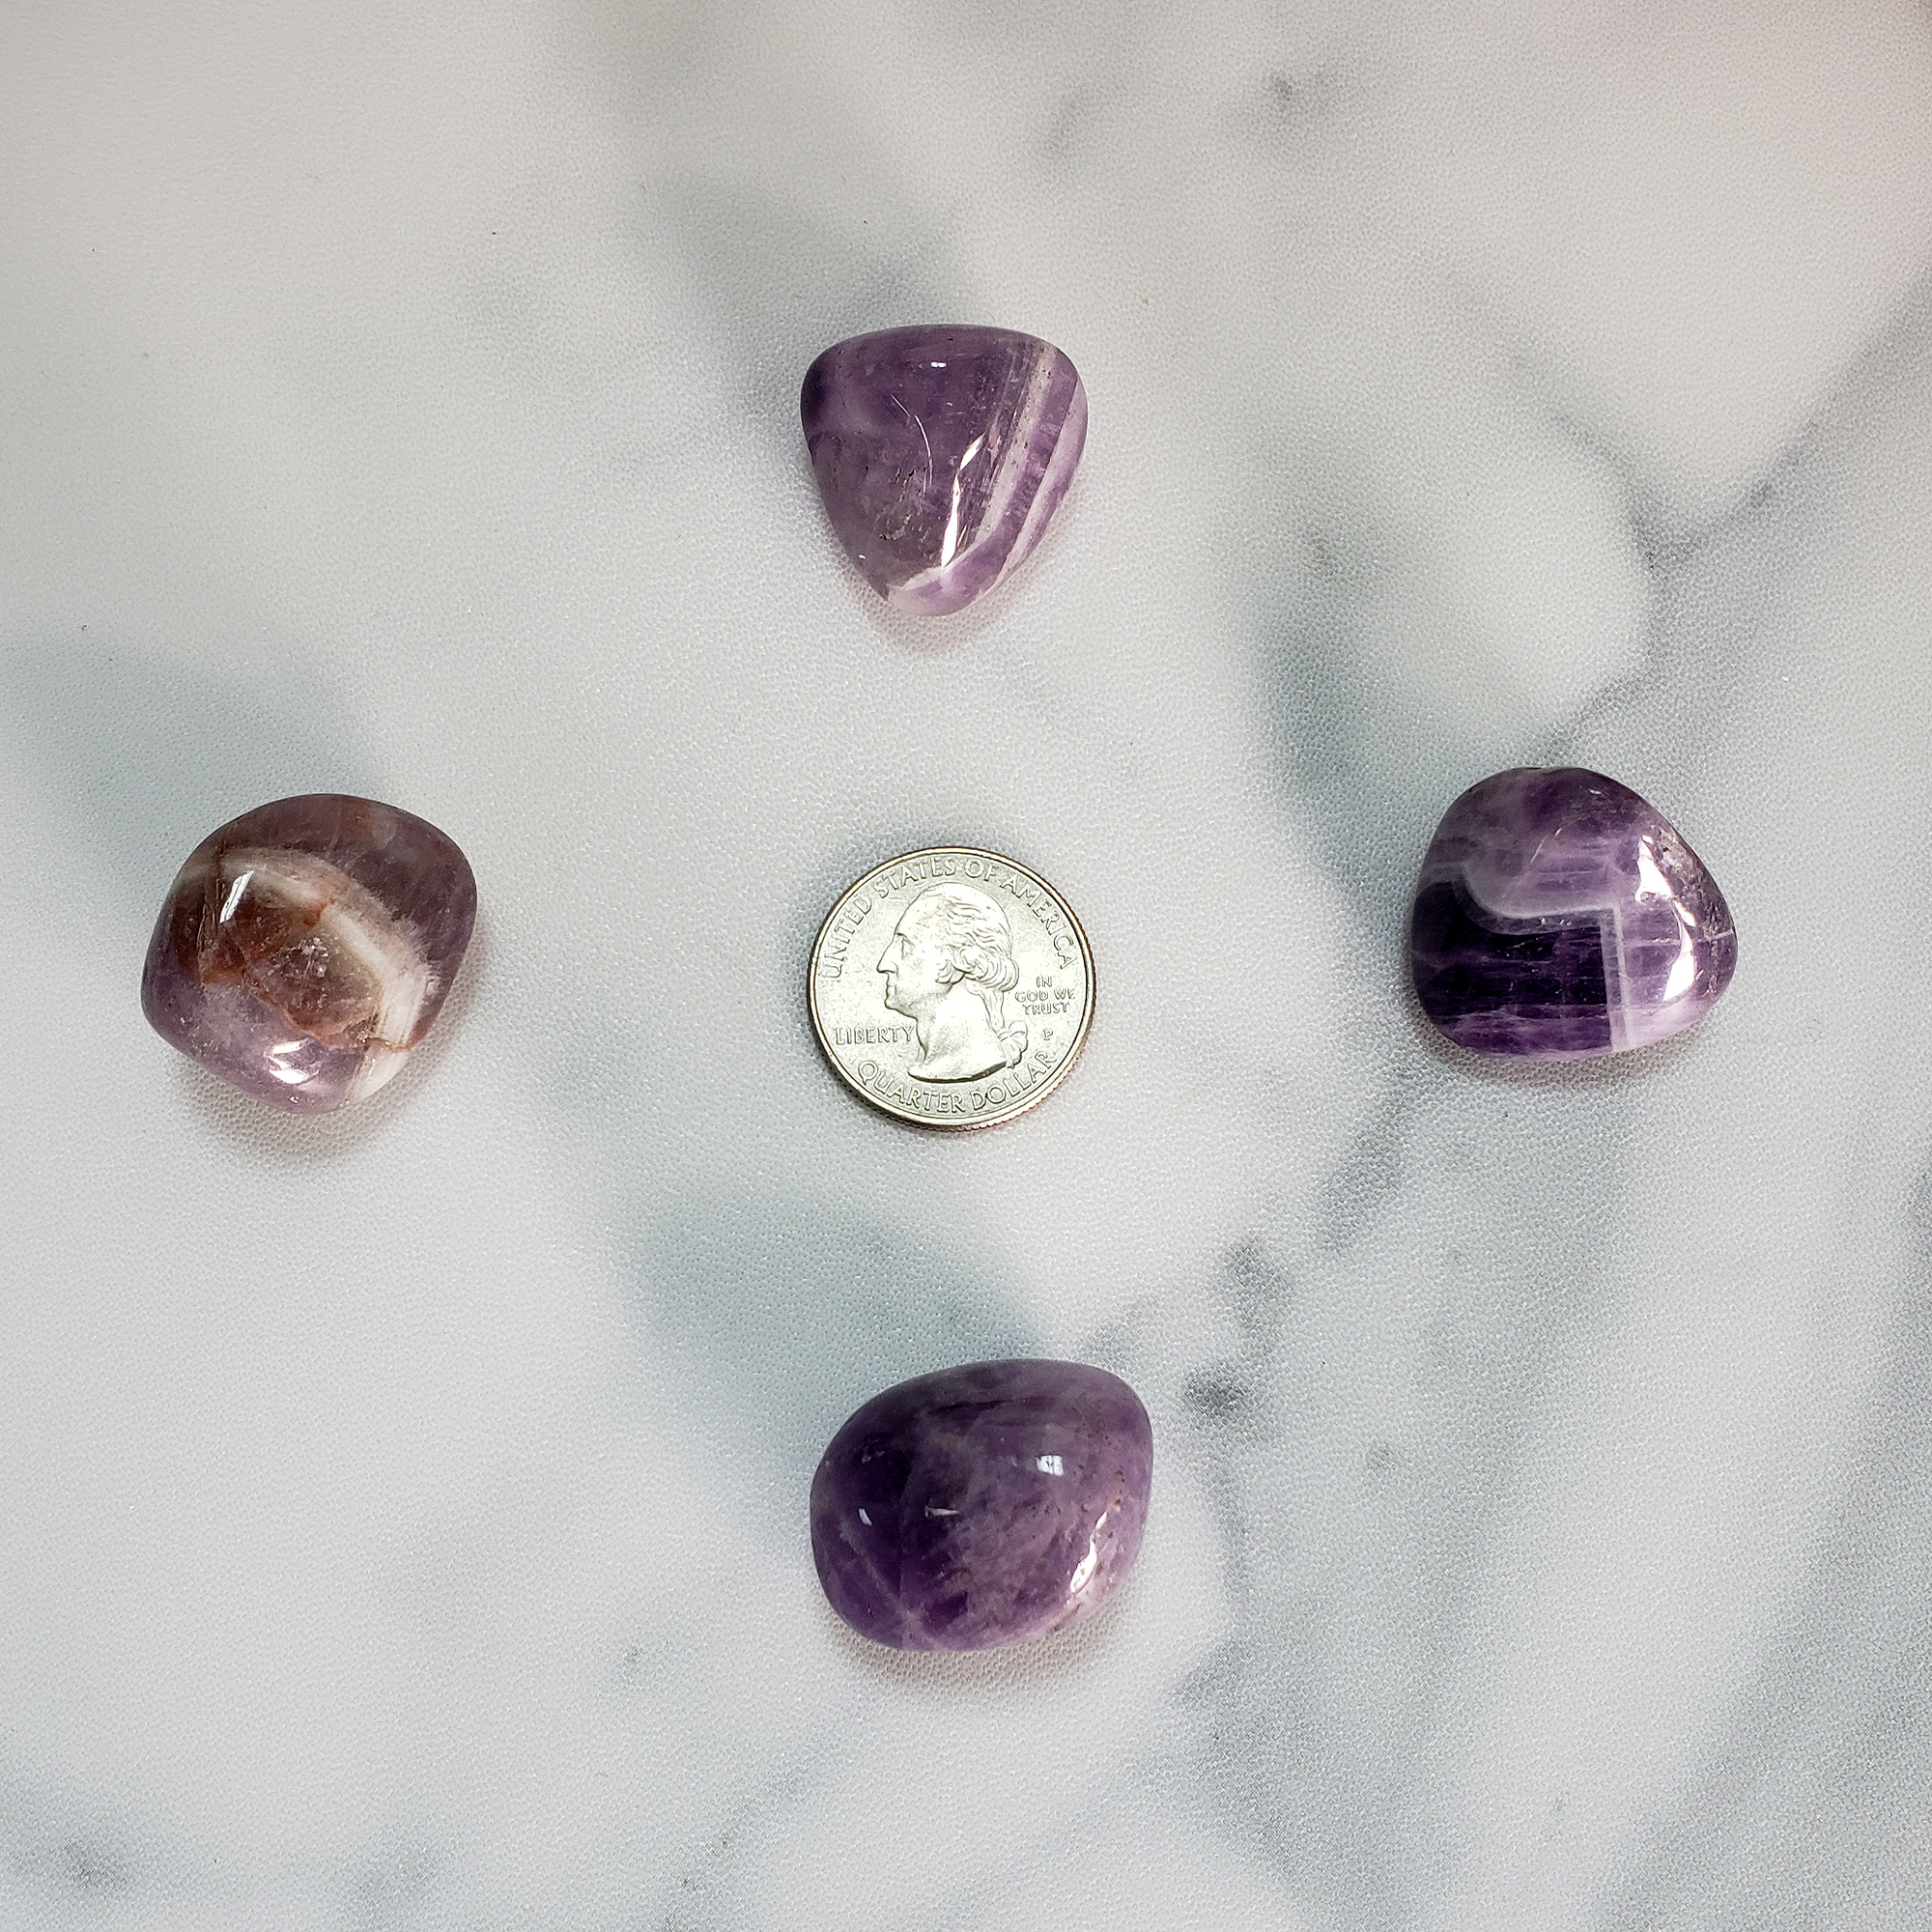 Dogtooth Amethyst Tumbled Crystal - Freeform One Stone - Size Comparison